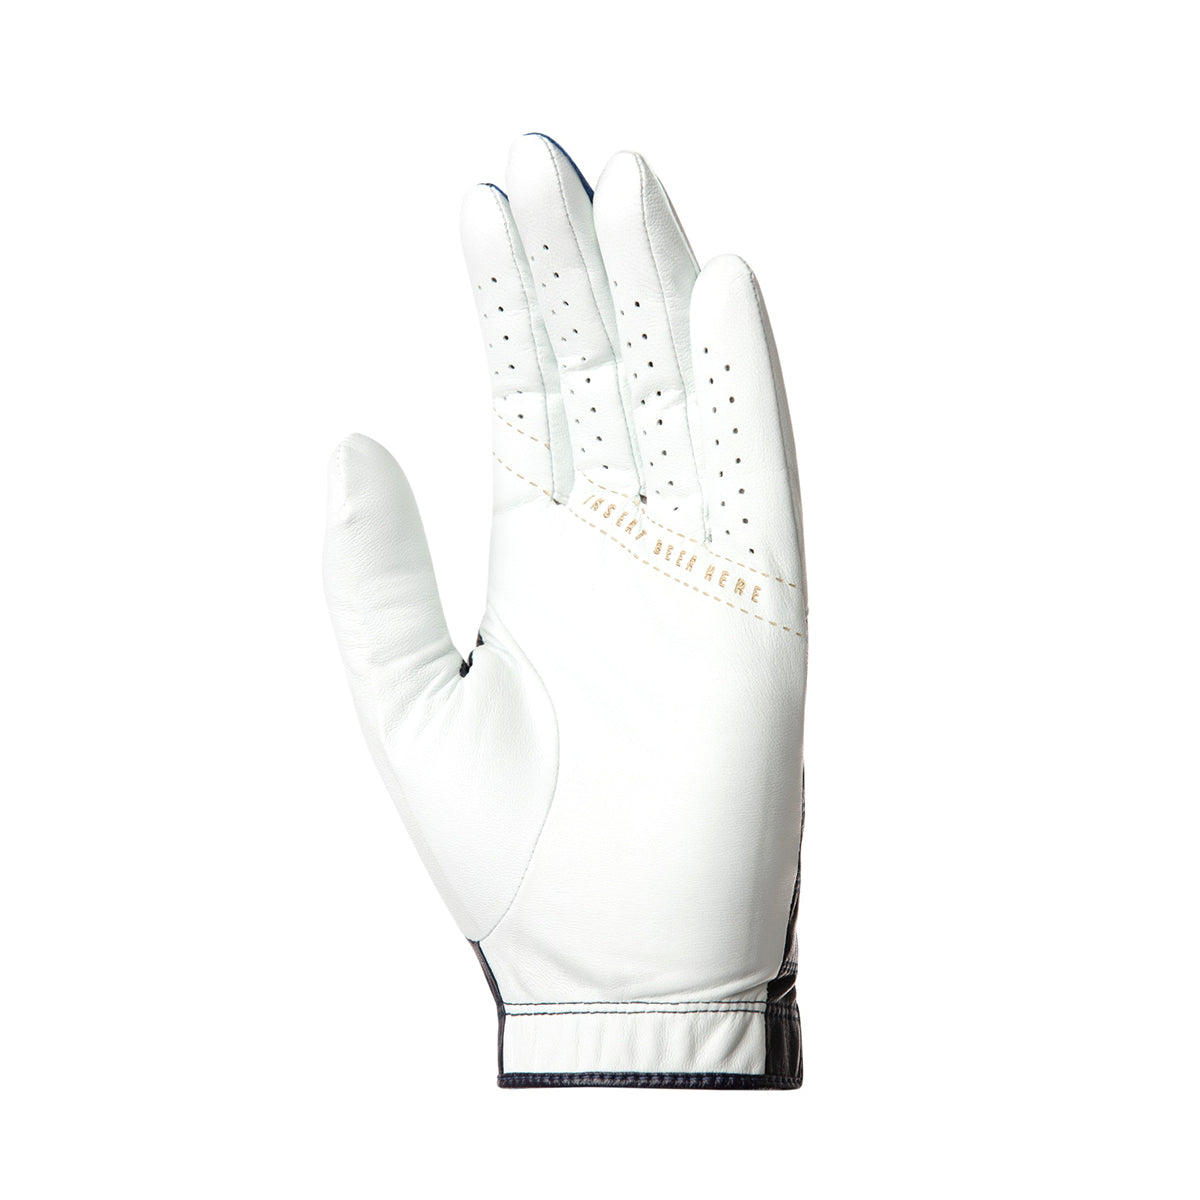 Cuater Golf Double Me Glove MLH 4MT075 Blue Nights | Function18